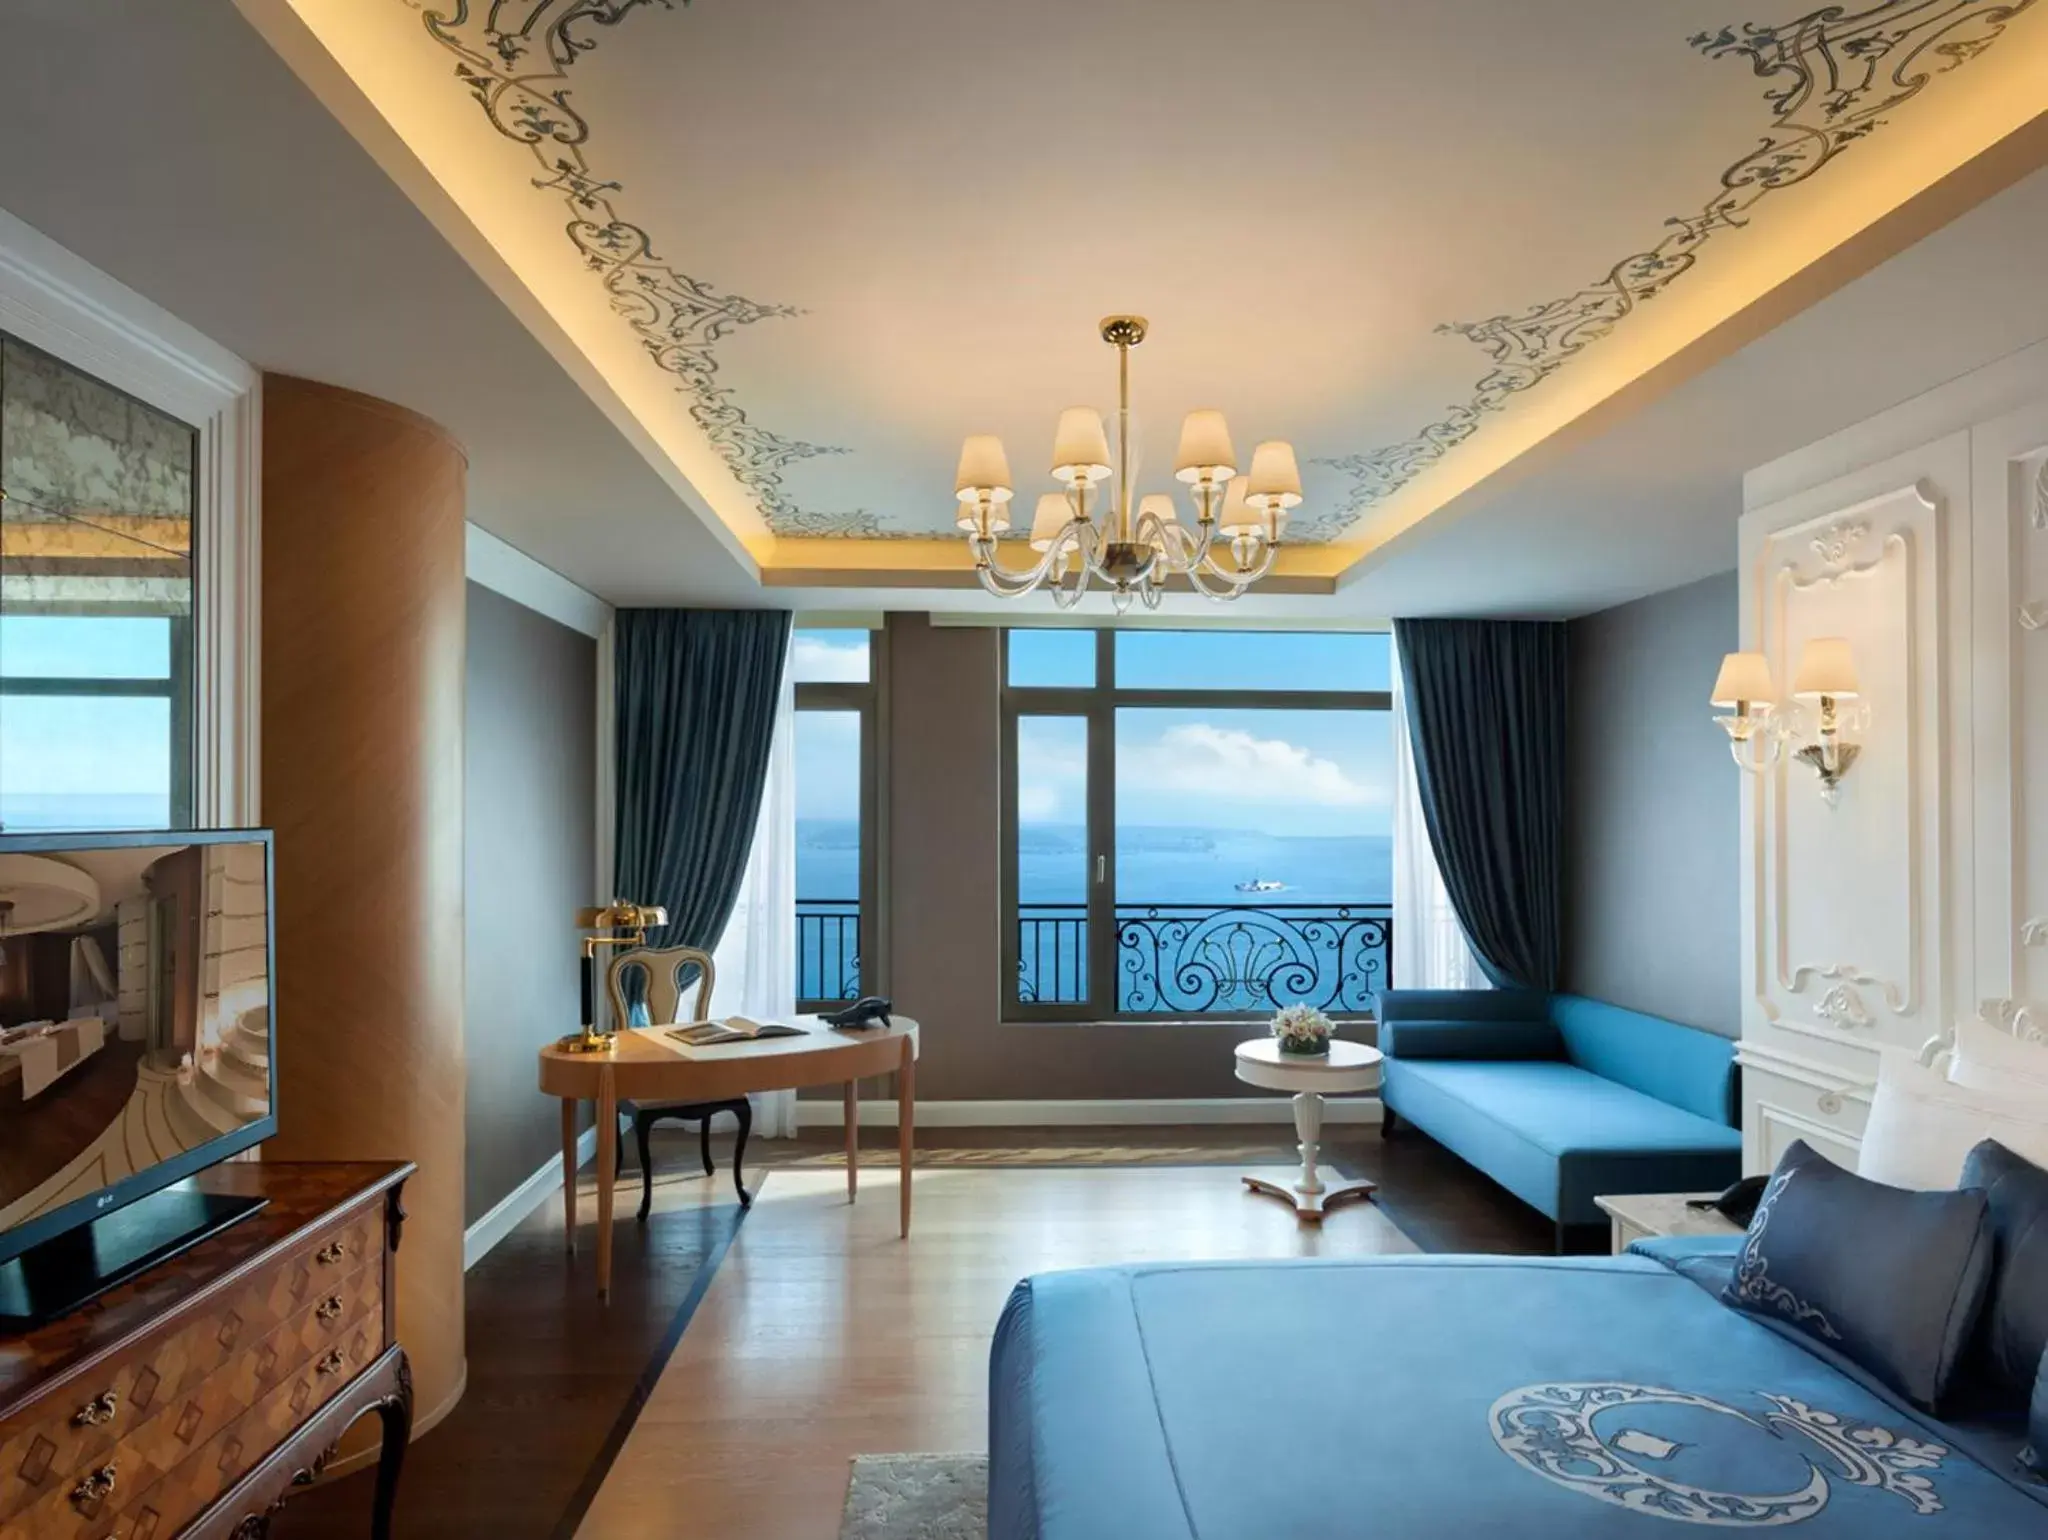 Executive Bosphorus View With Lounge Access - single occupancy in CVK Park Bosphorus Hotel Istanbul